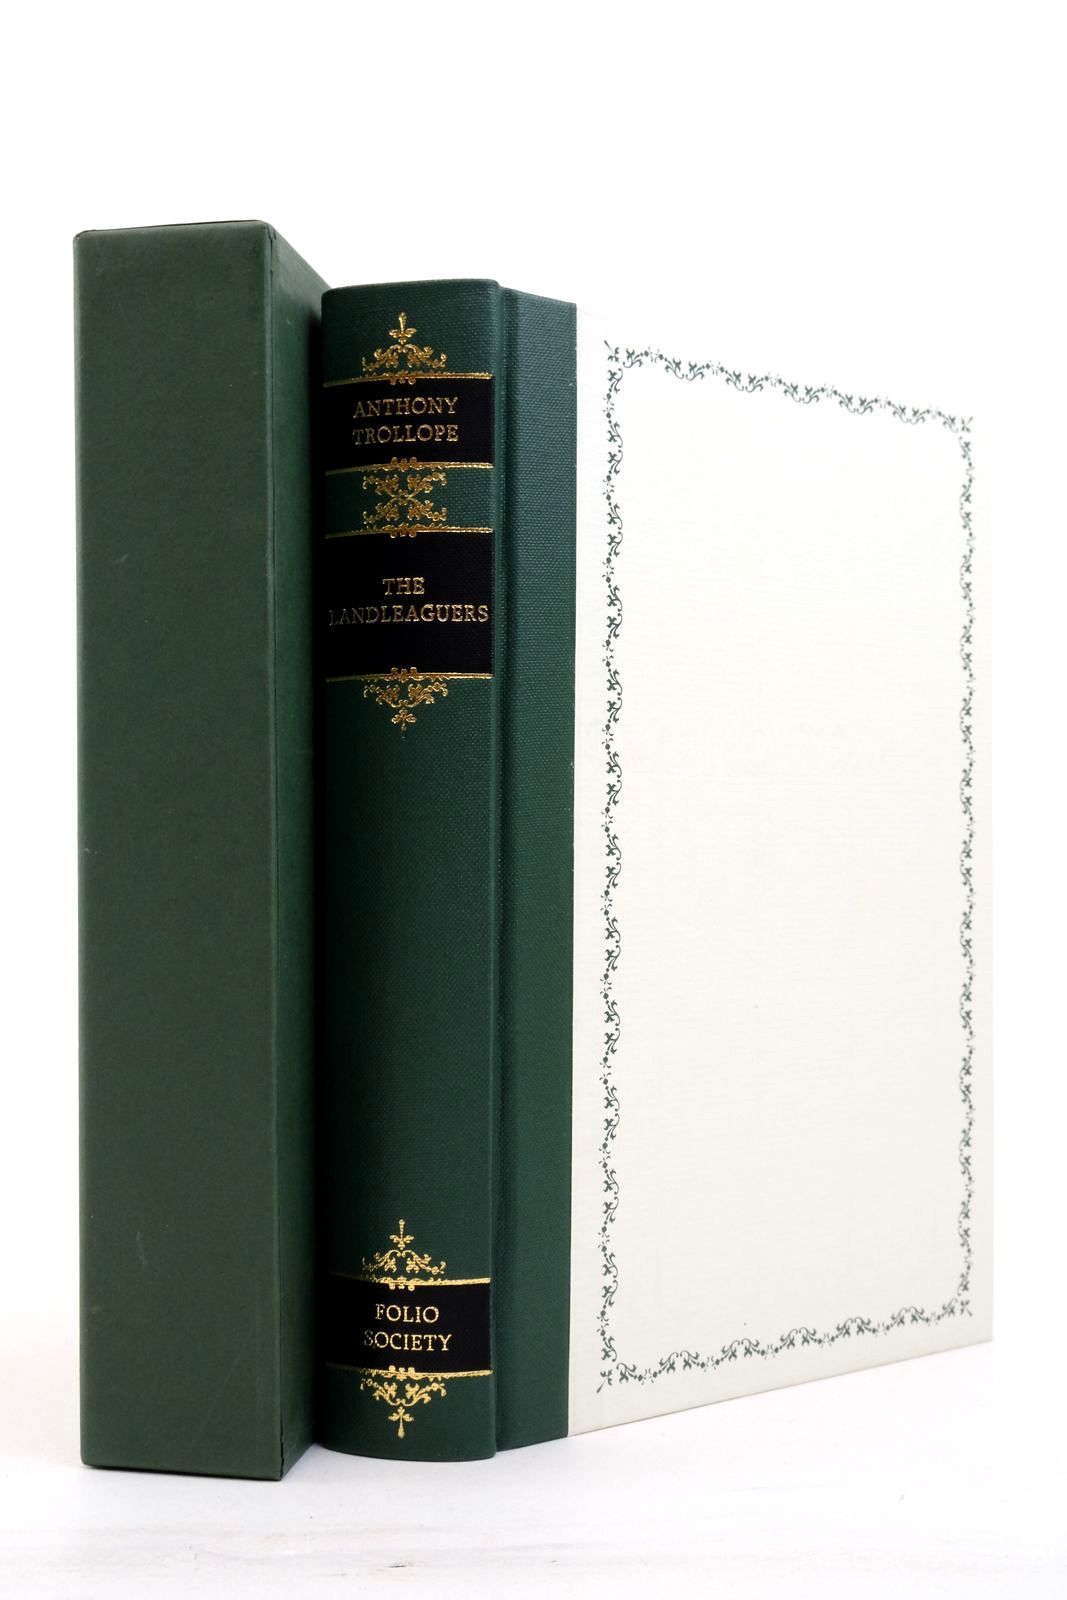 Photo of THE LANDLEAGUERS written by Trollope, Anthony Delaney, Frank illustrated by Biro, Val published by Folio Society (STOCK CODE: 2138209)  for sale by Stella & Rose's Books